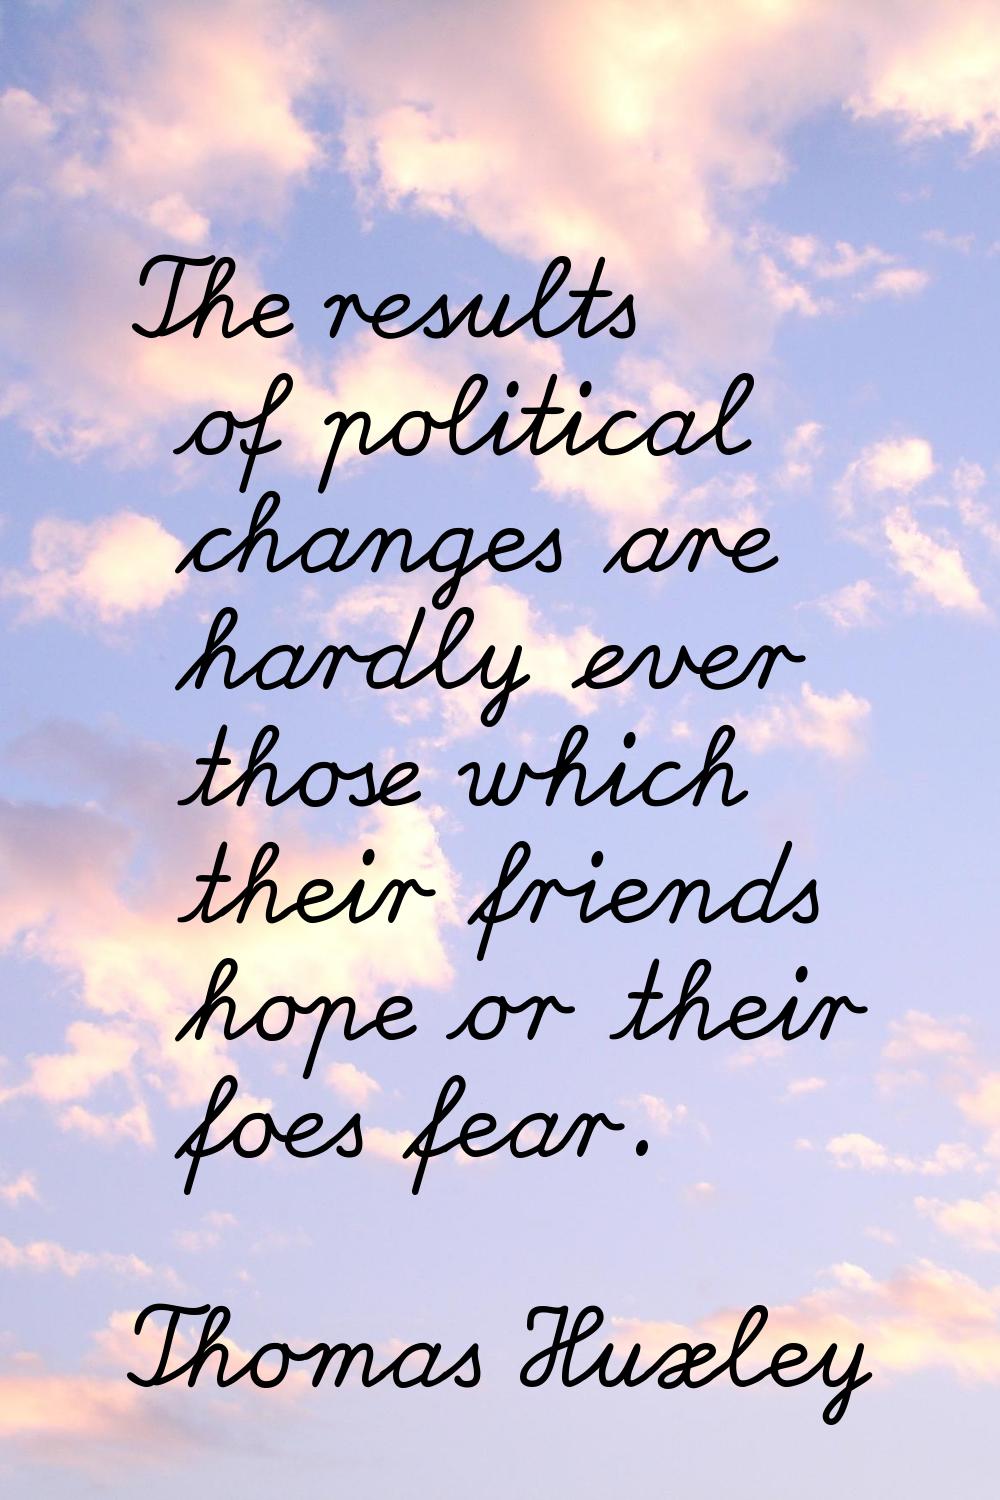 The results of political changes are hardly ever those which their friends hope or their foes fear.